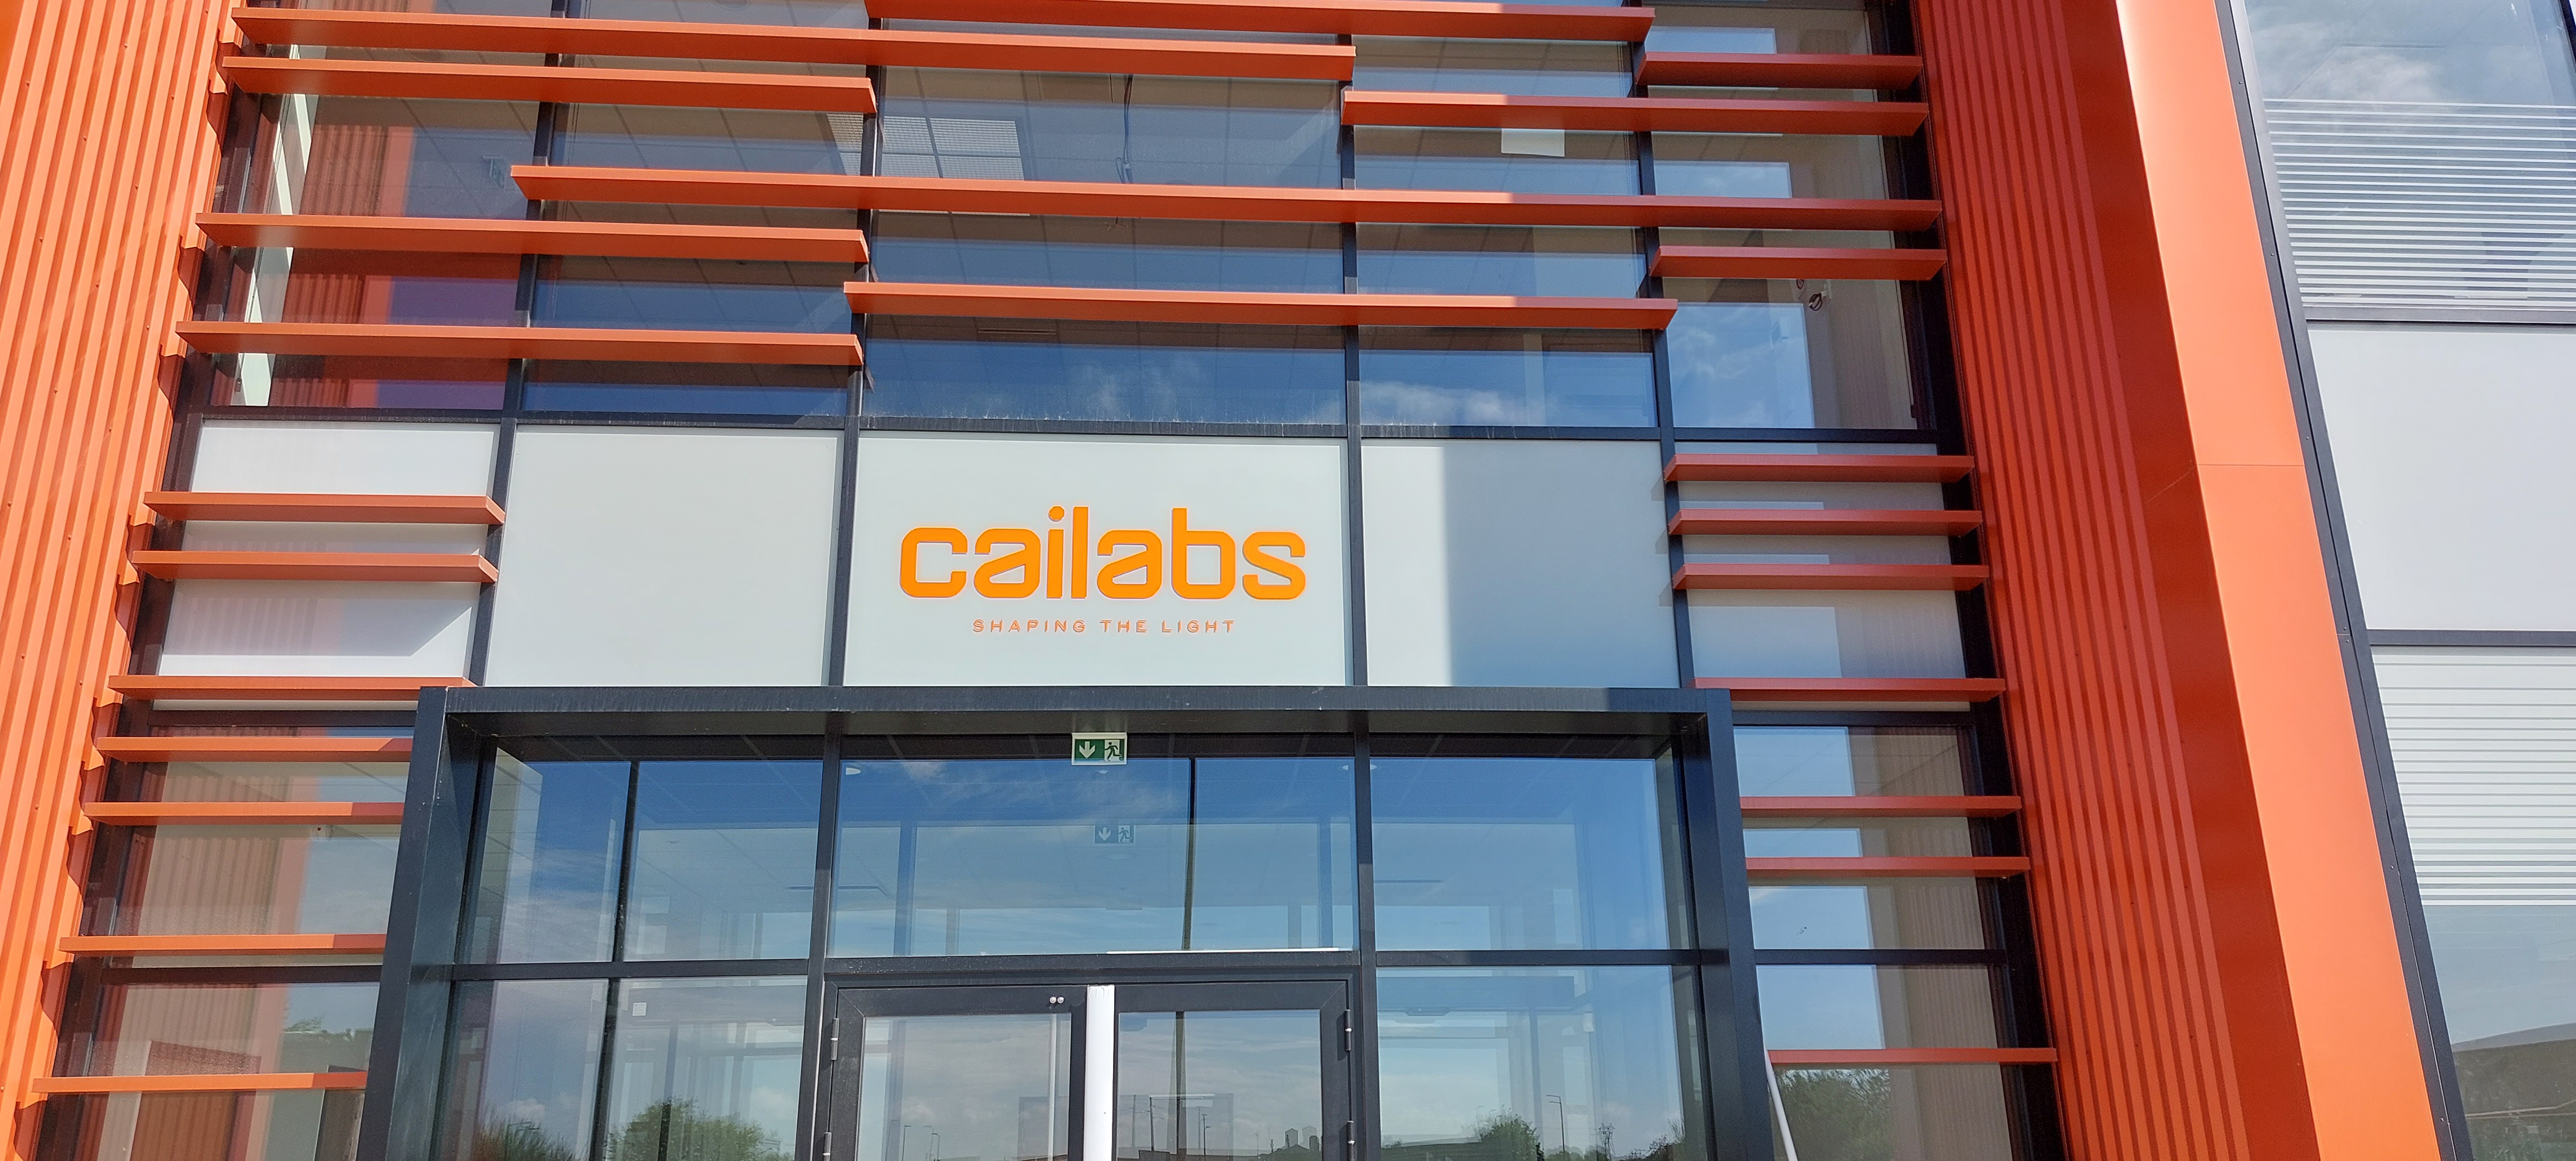 CAILABS